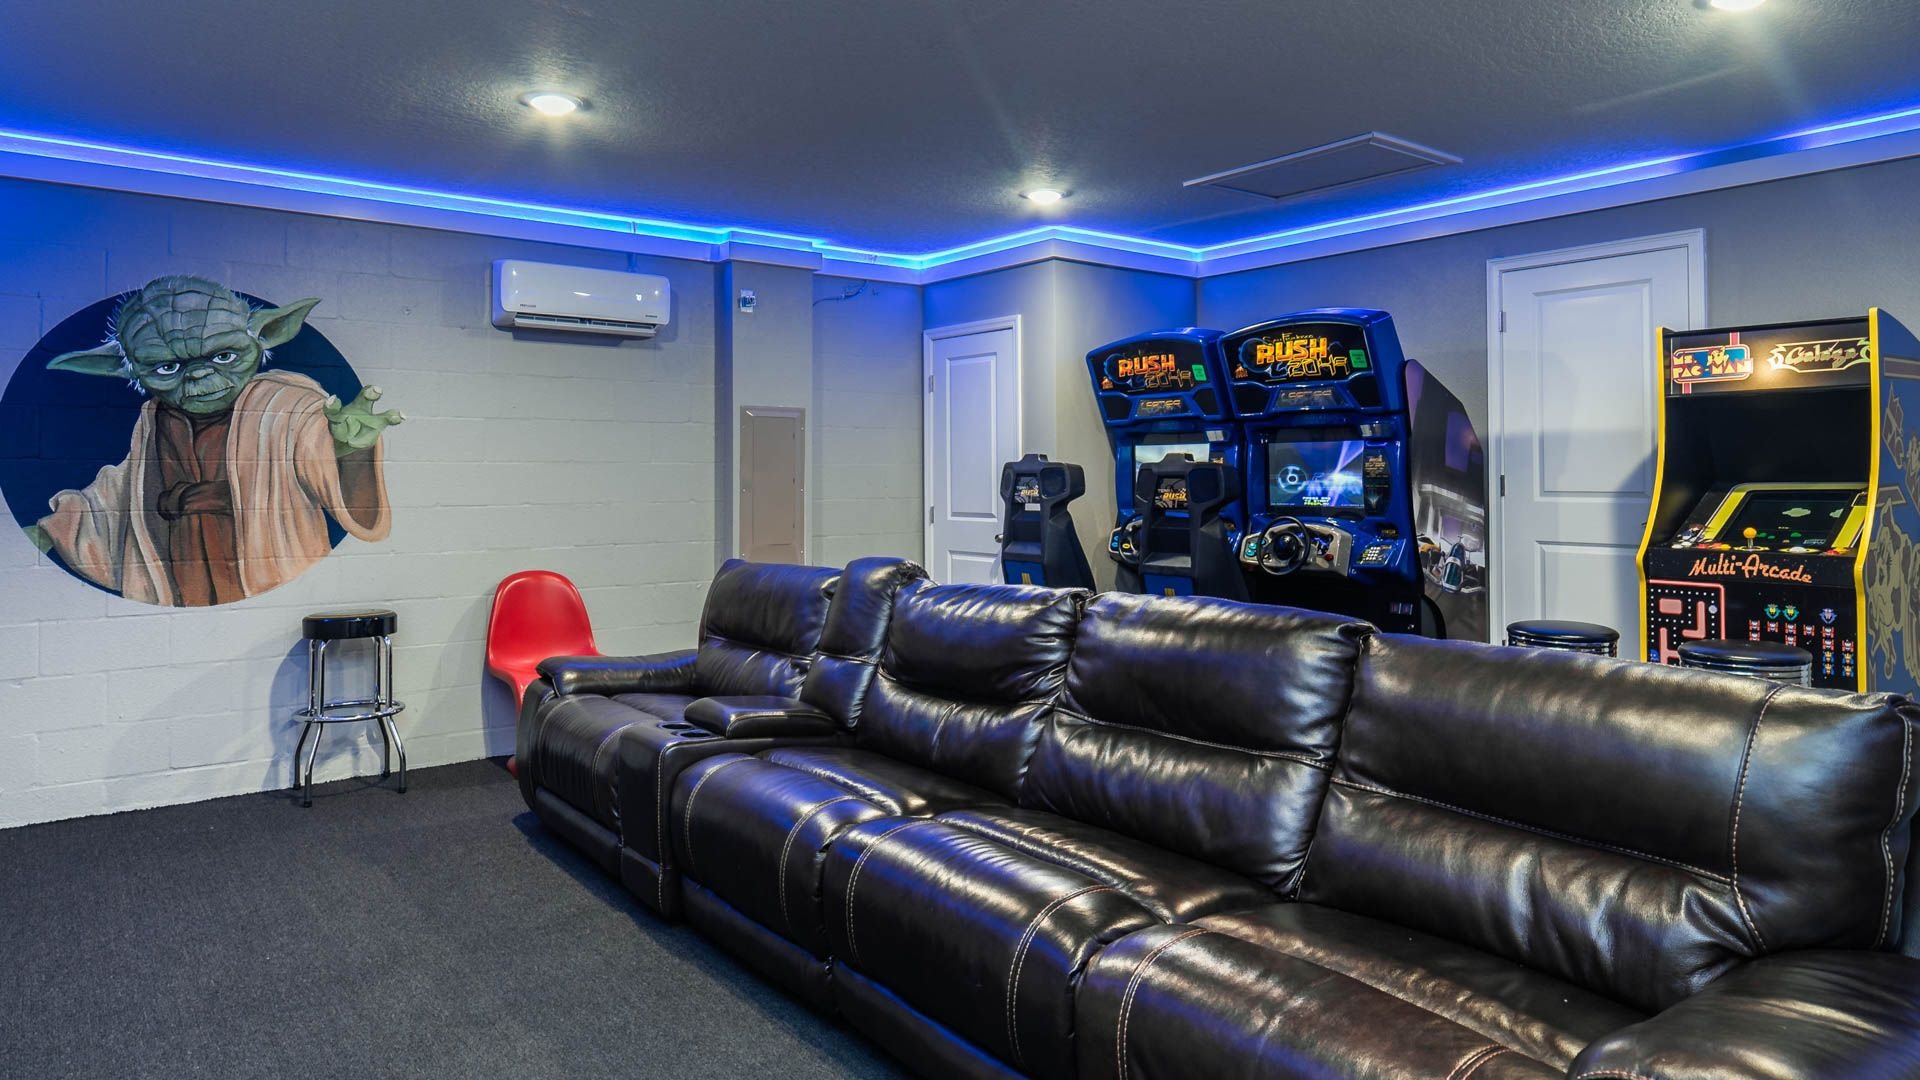 Theater Room/ Game room
2 driving multi video games
1 multi video arcade